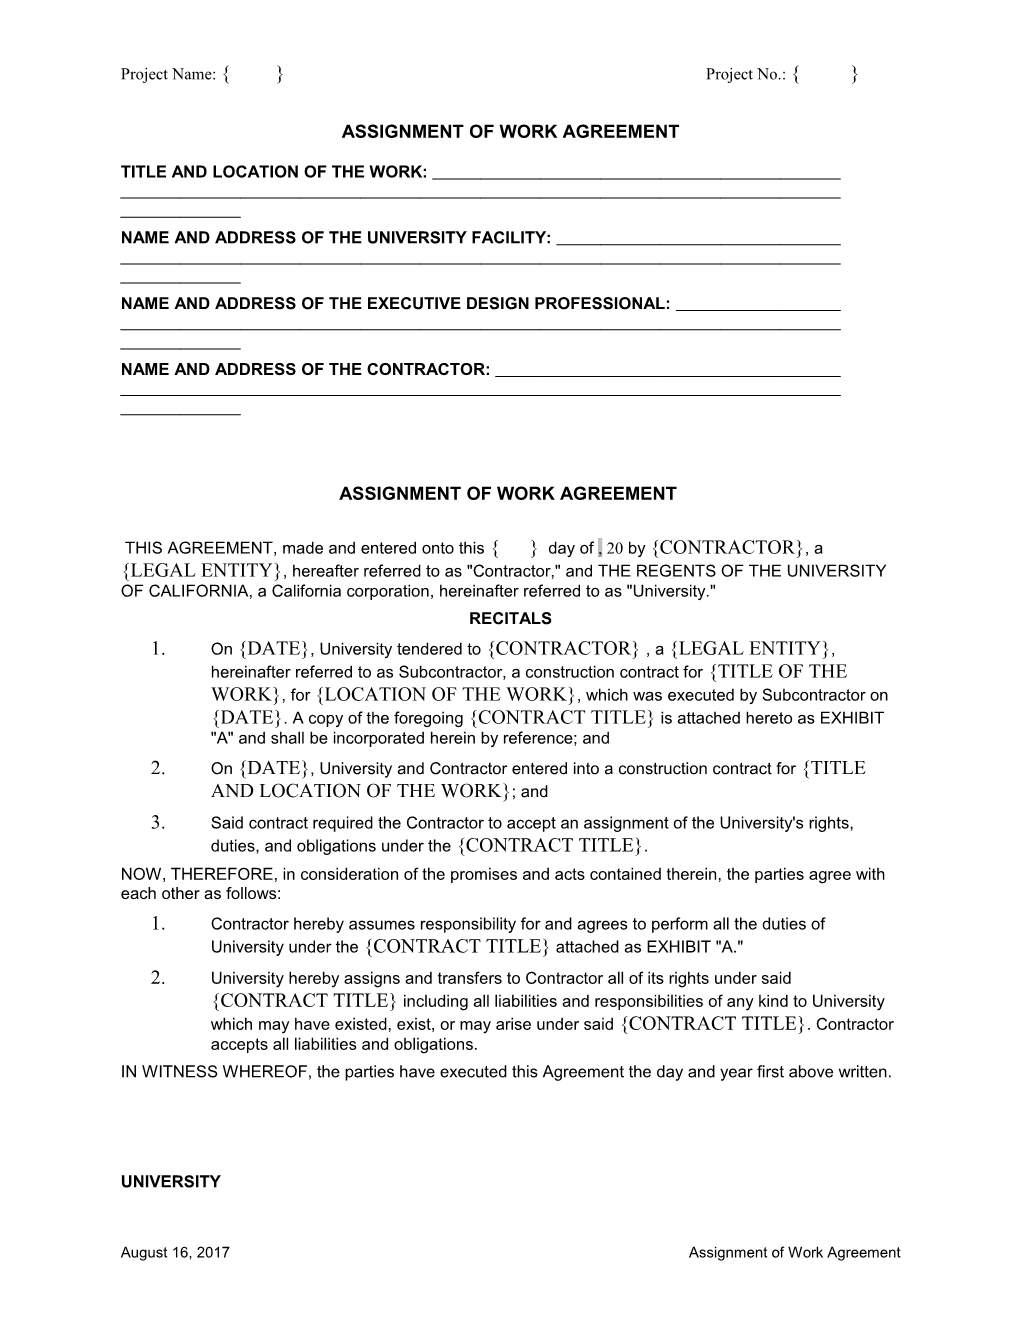 Assignment of Work Agreement